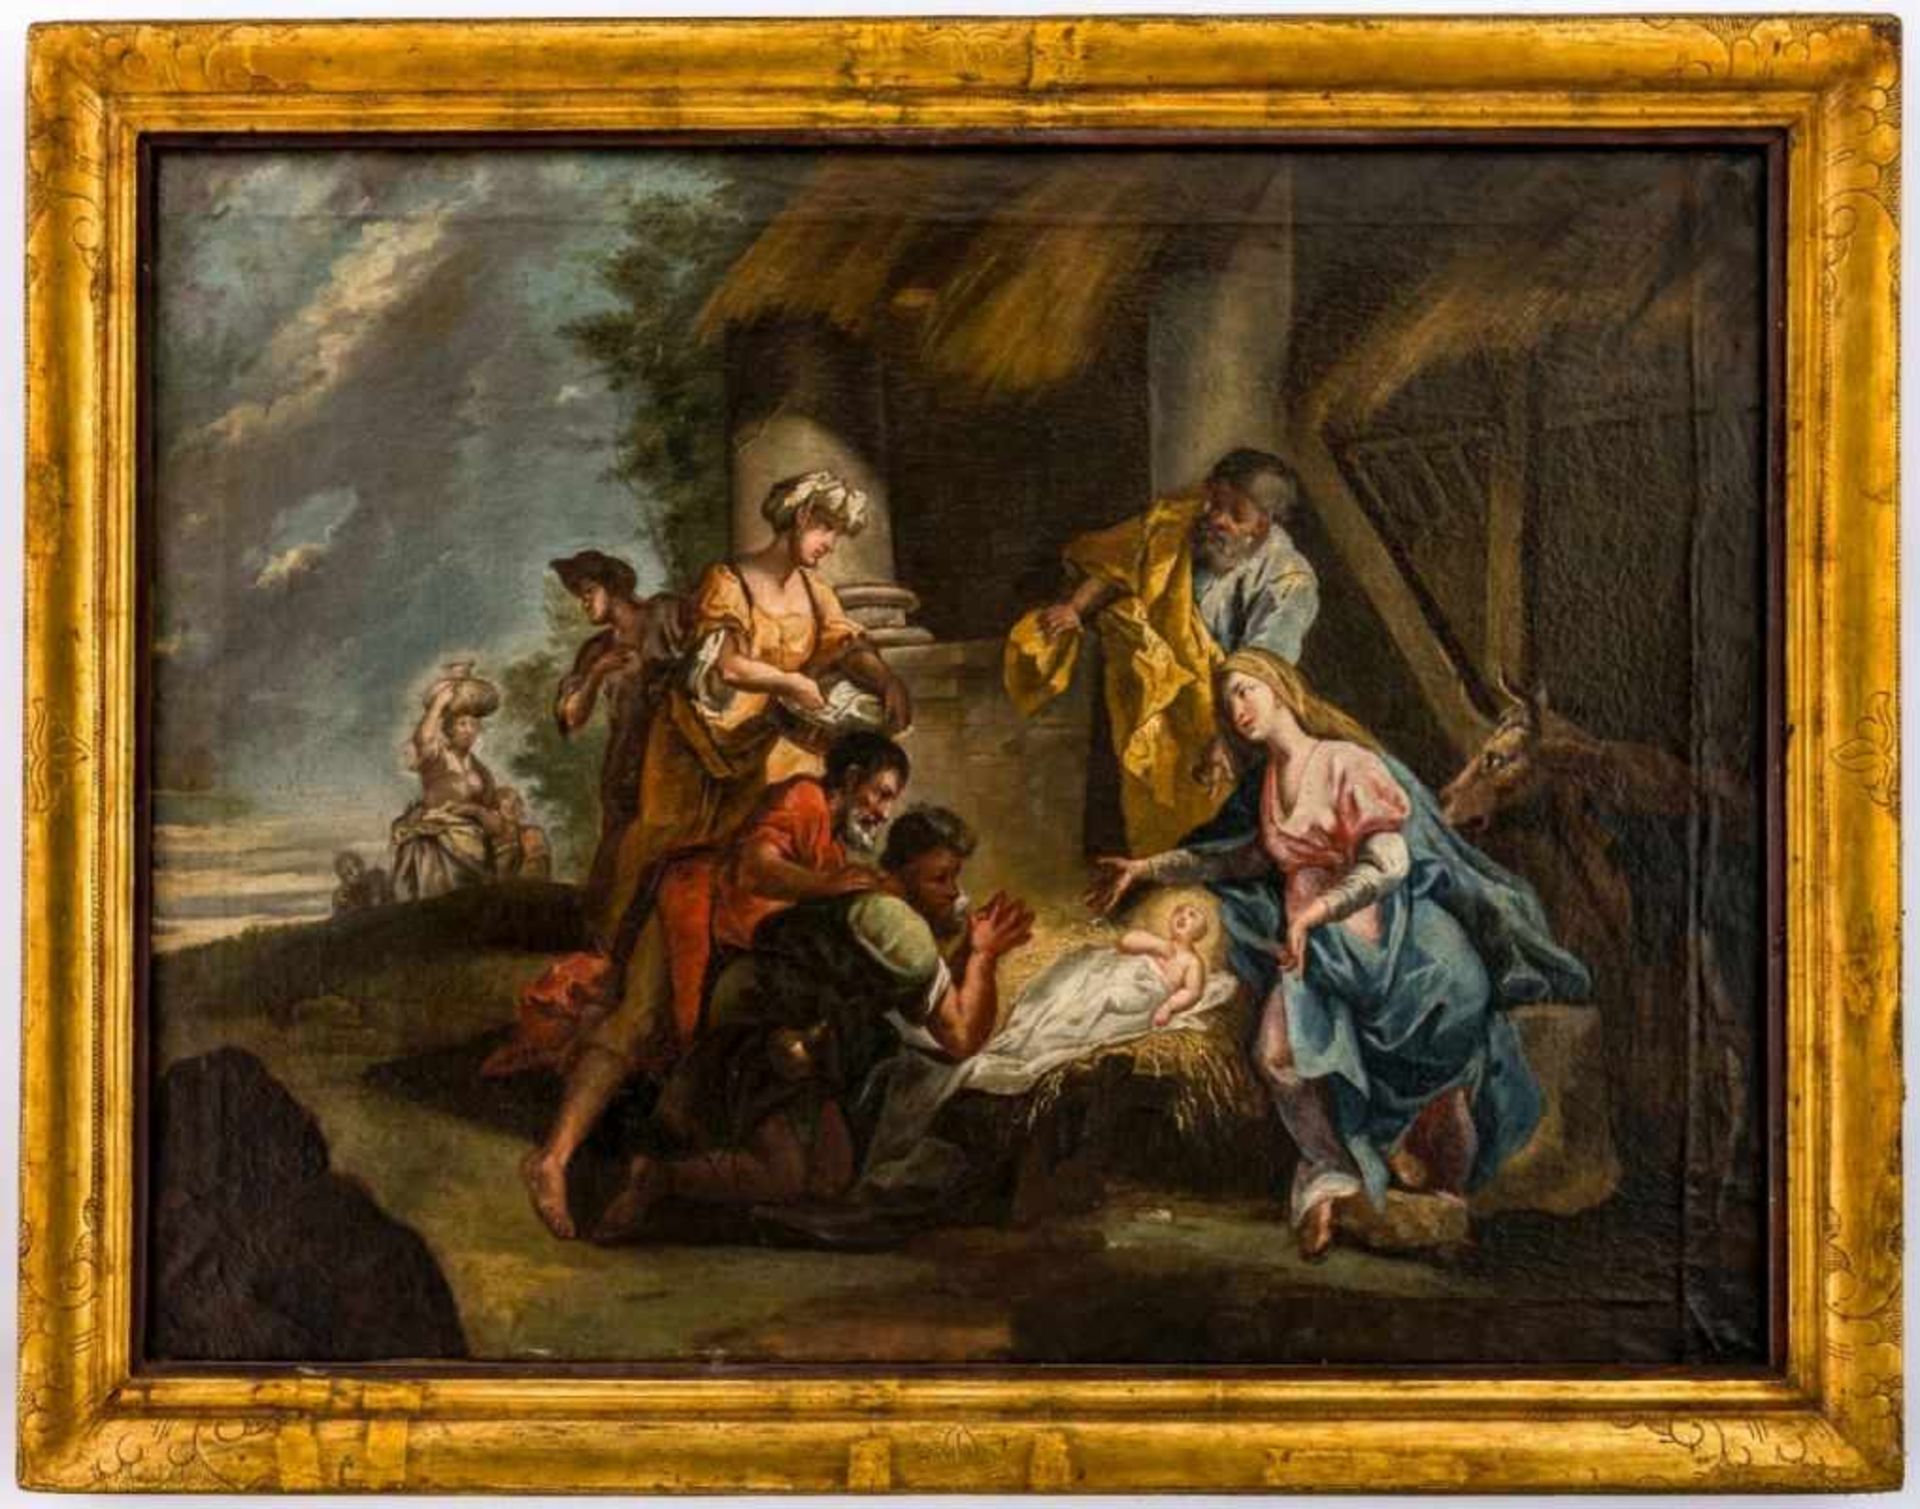 Very large painting of the Adoration of the Shepherds, Northern Italy, oil/canvas, 18thcentury, 70 x - Bild 2 aus 3